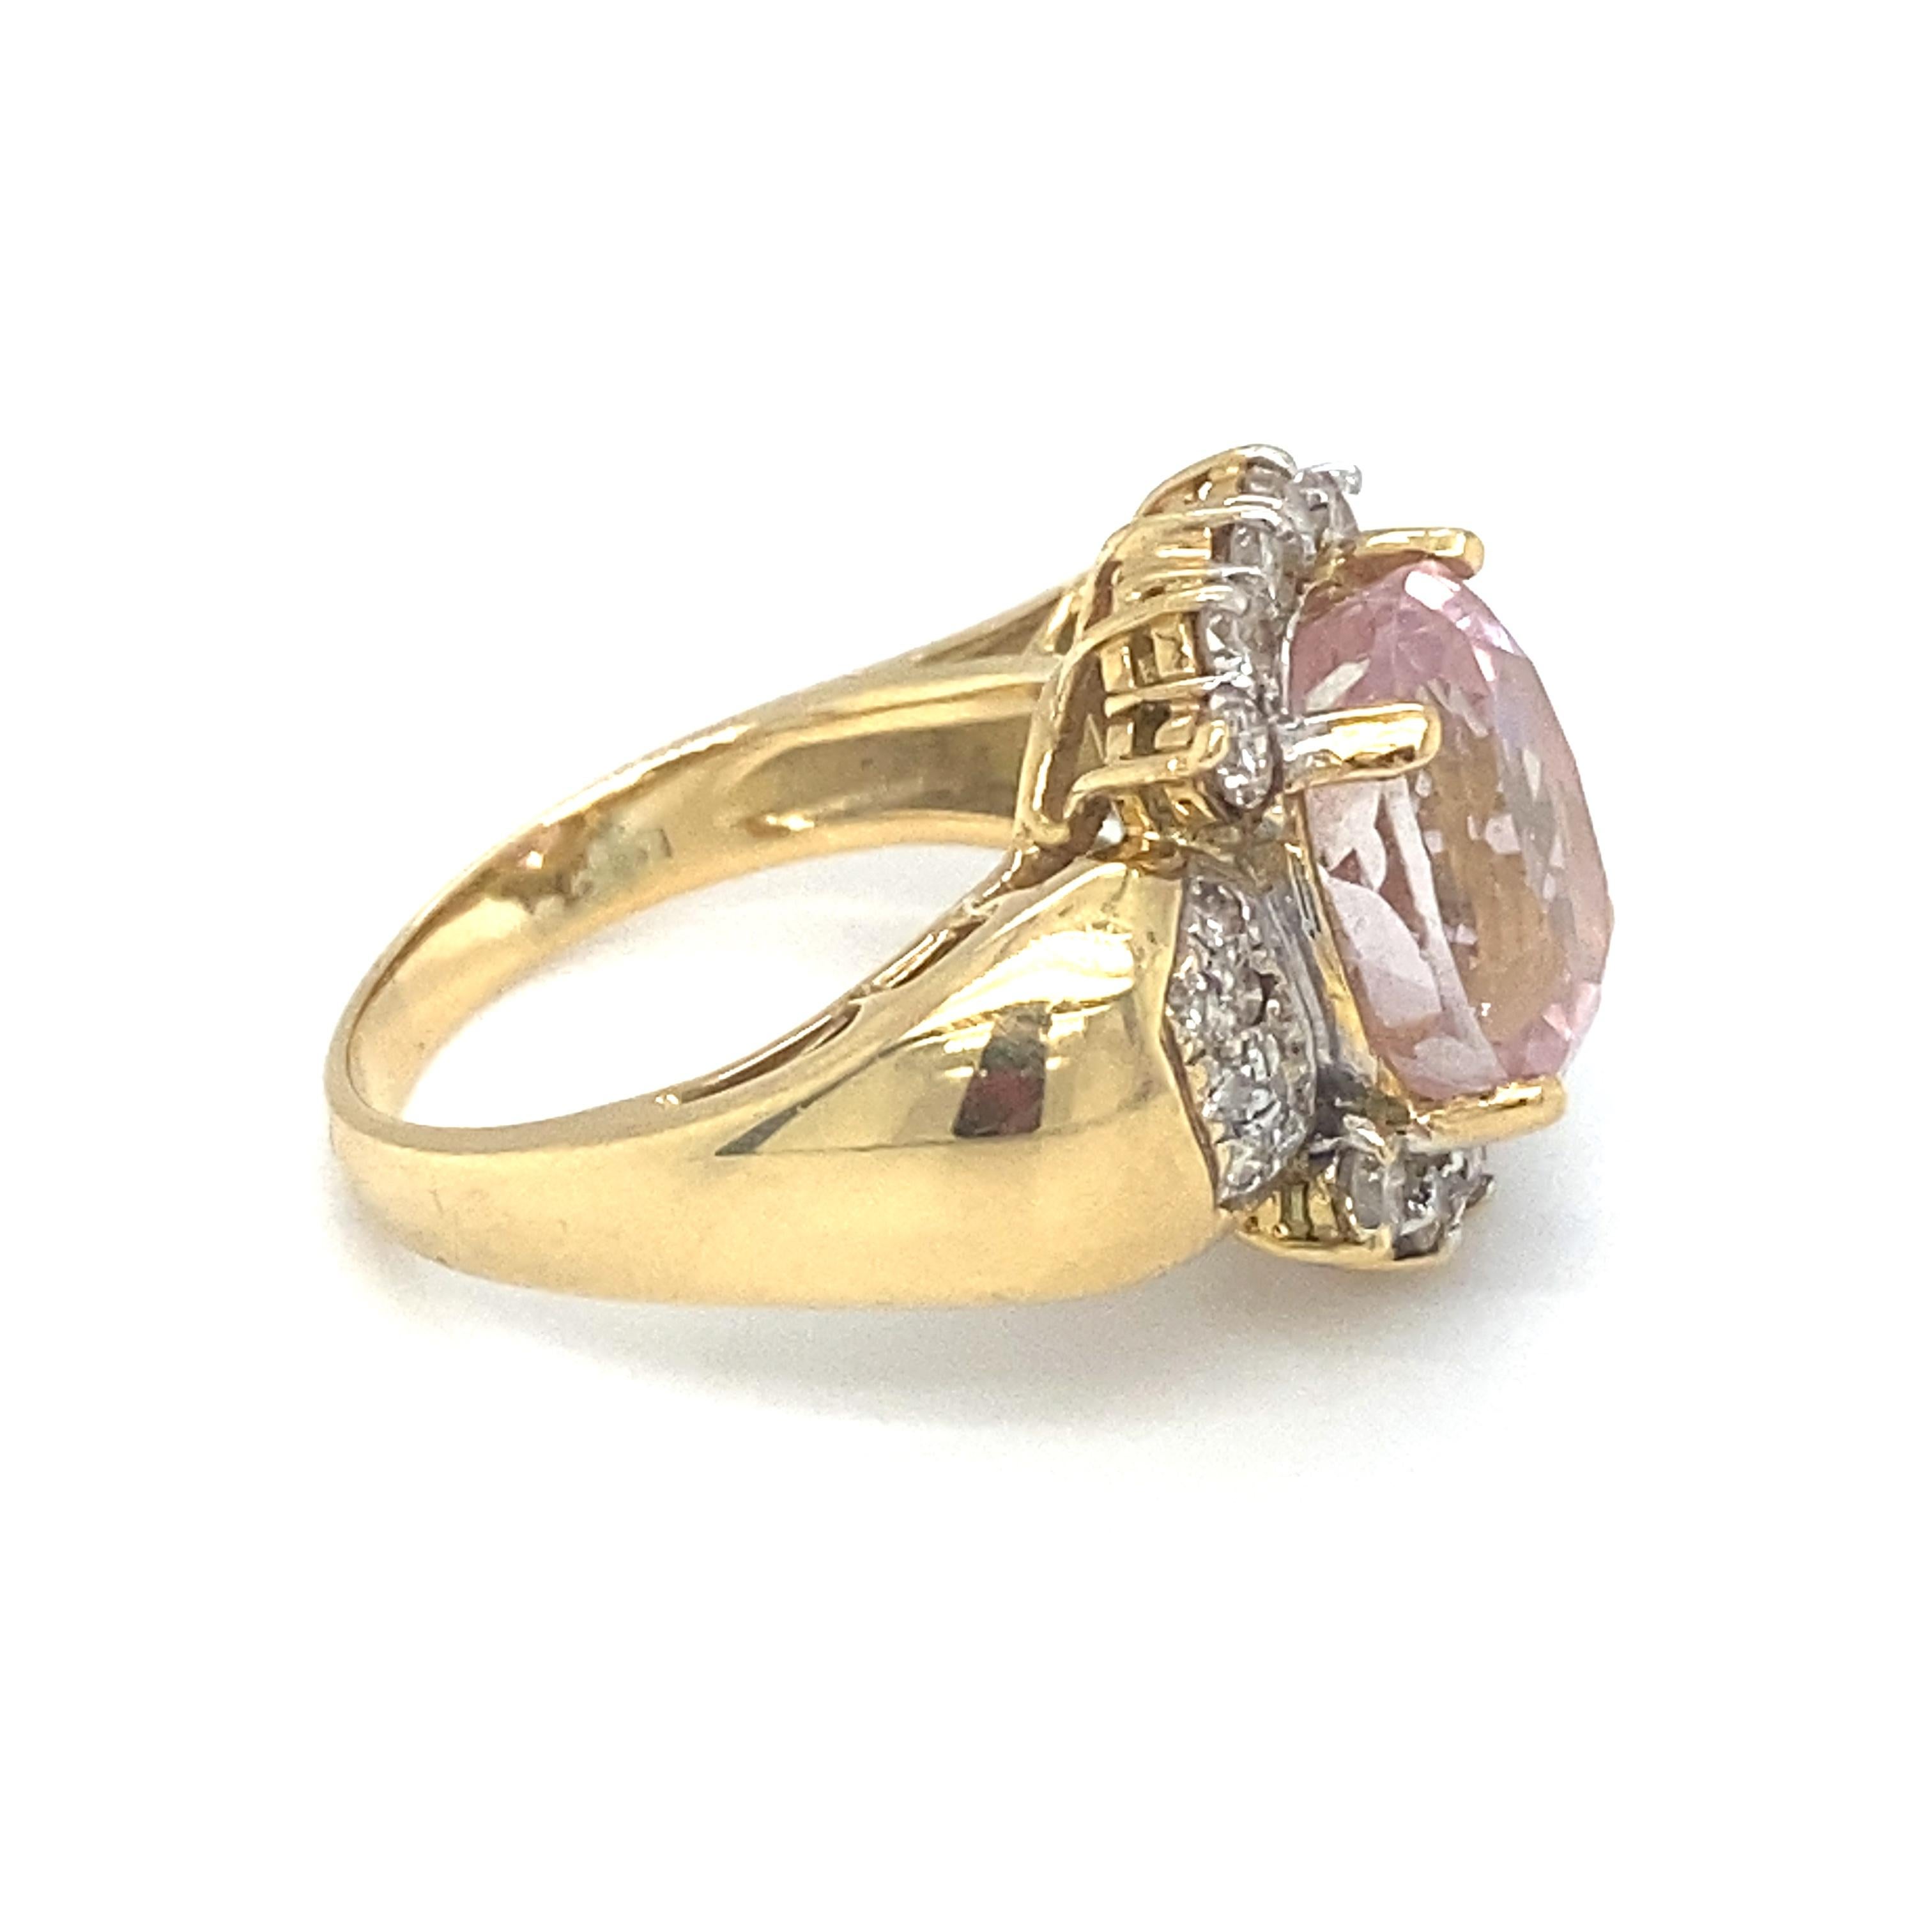 Le Vian 3.0ct Kunzite and Diamond Cocktail Ring in 18k Gold For Sale 1